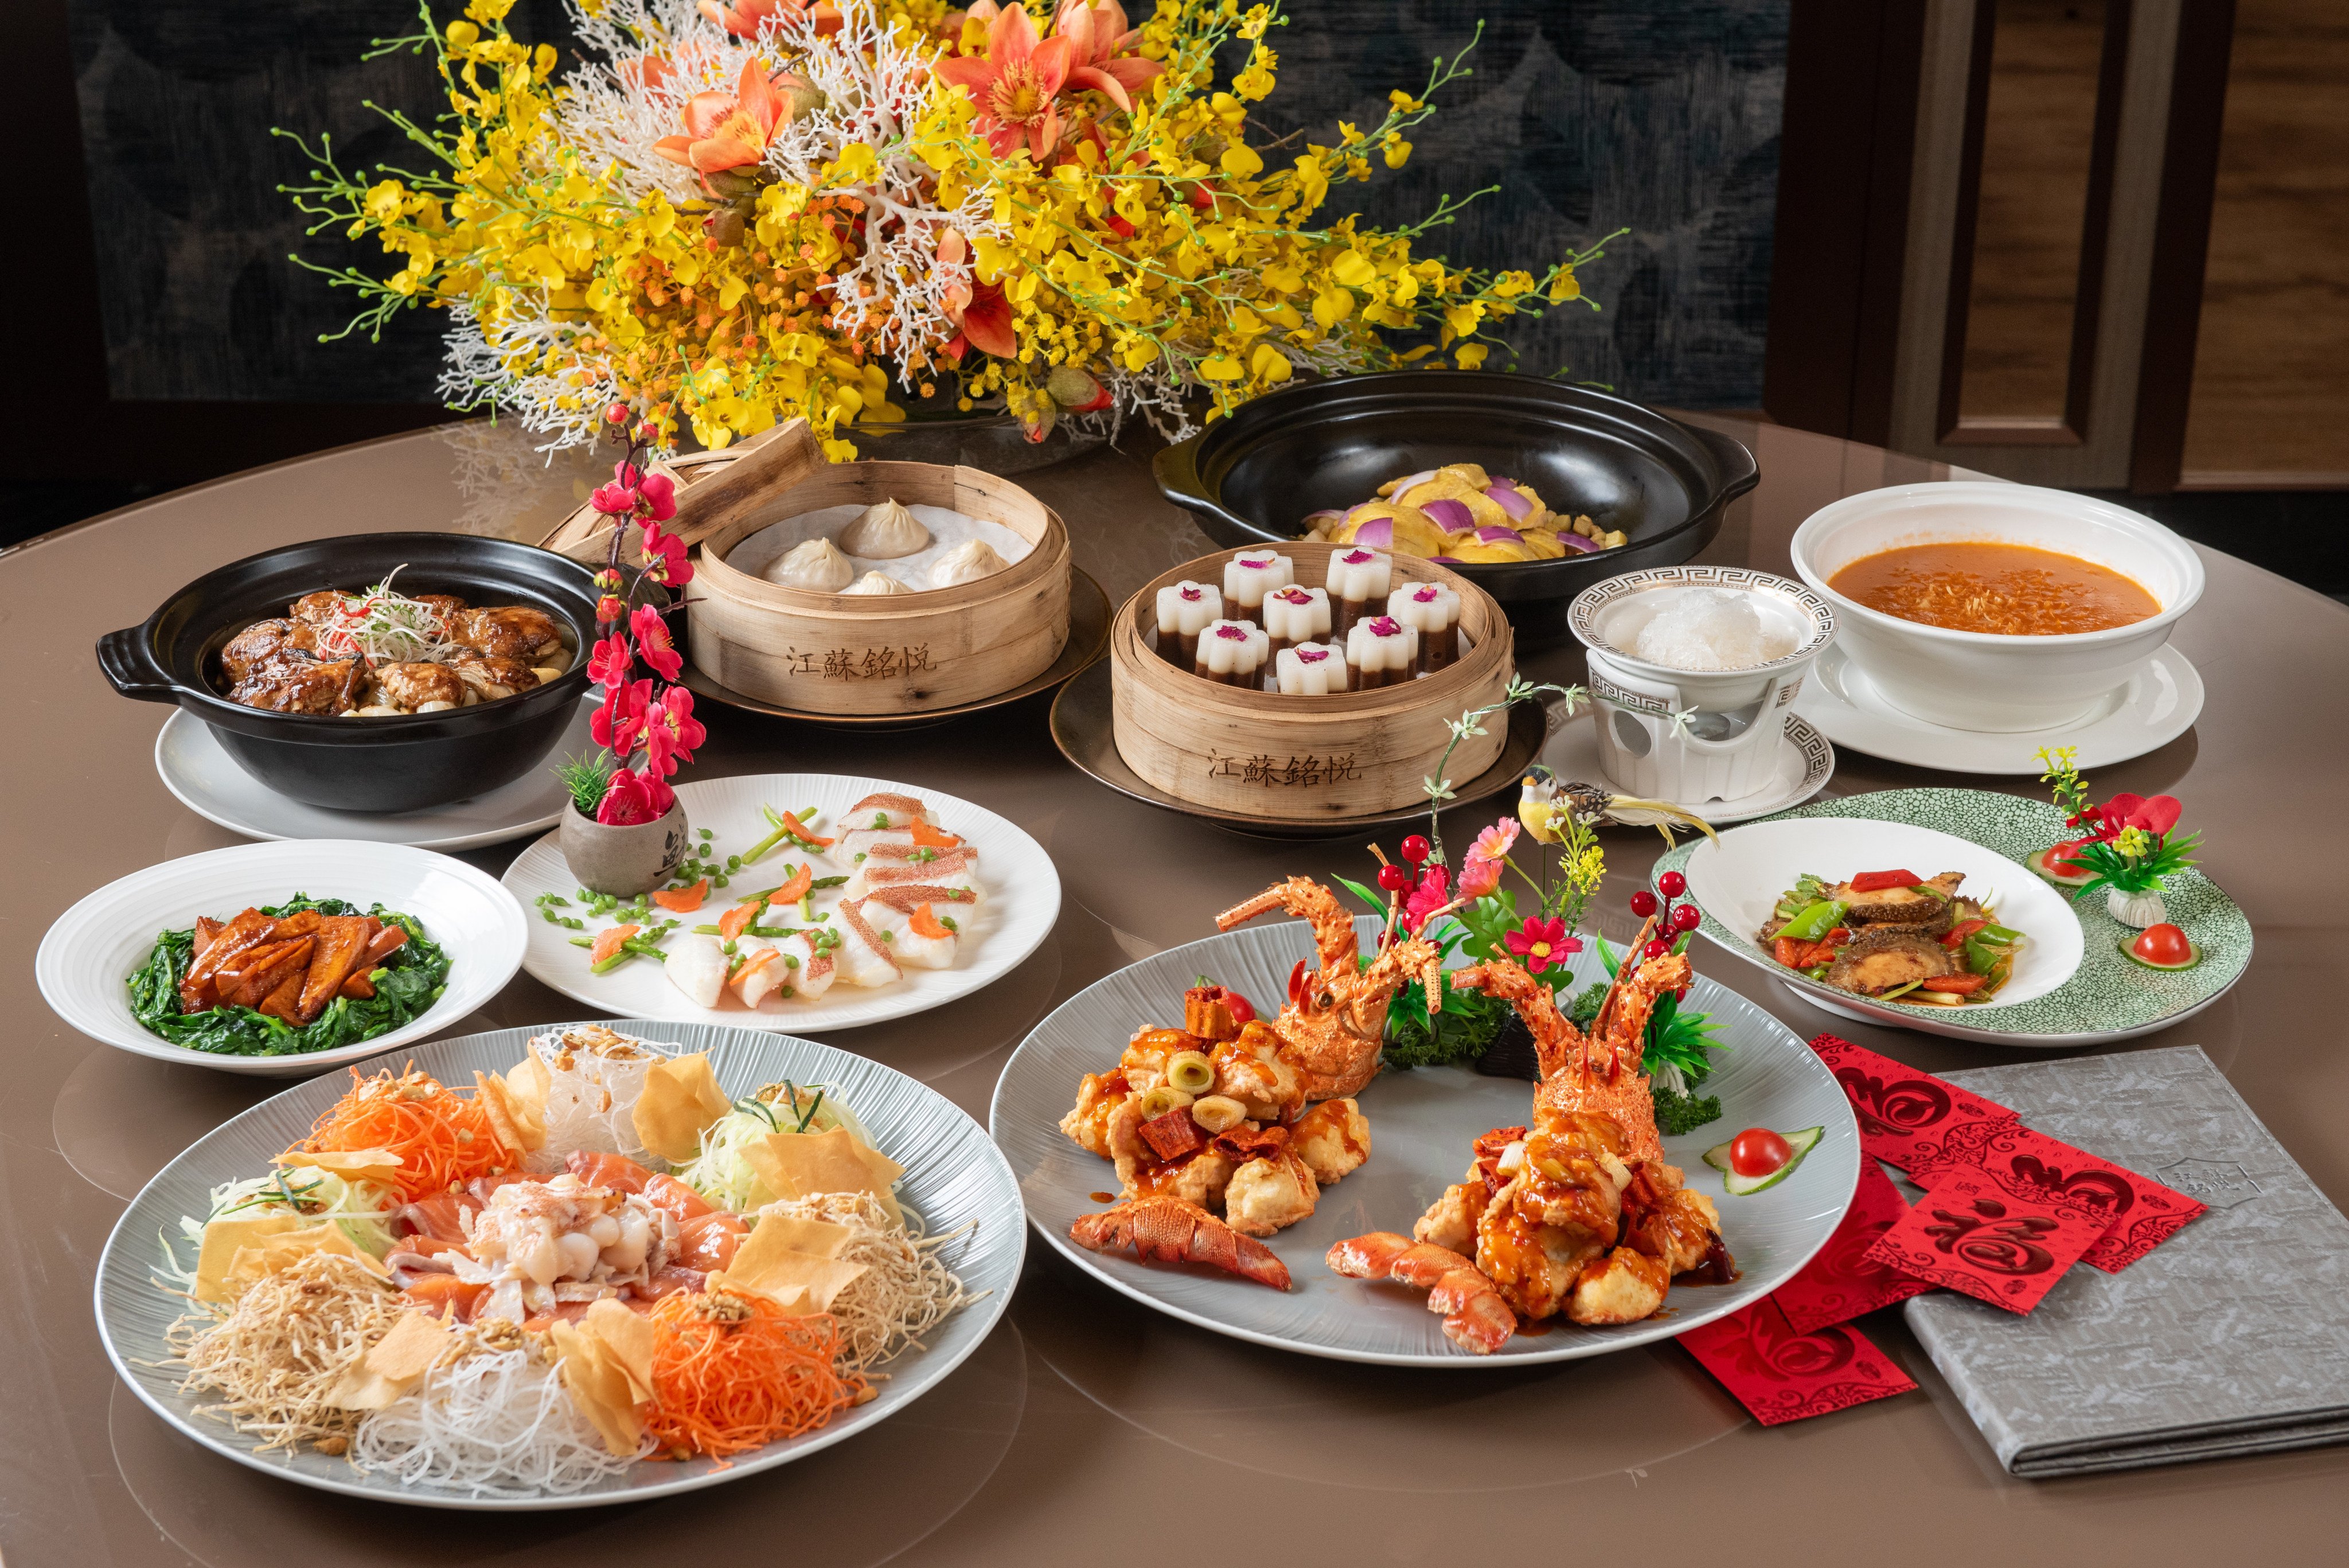 Dishes from Jiangsu Club’s Chinese New Year set meal for eight, including the “lo hei” tossed salad (front) for prosperity. It is one of 10 holiday dining options in Hong Kong we have picked out. Photo: Jiangsu Club